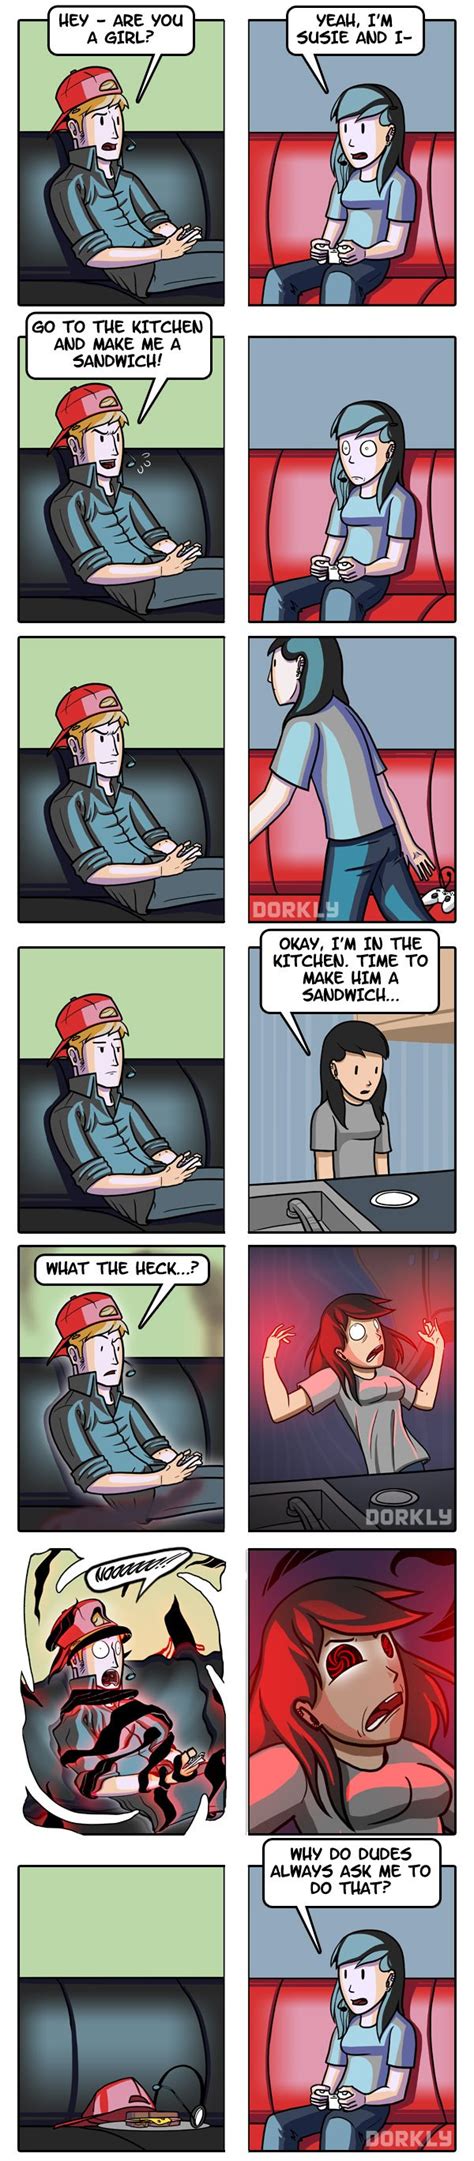 See more of make me a sandwich on facebook. "Hey girl, make me a sandwich" Comic | Reviews, news ...